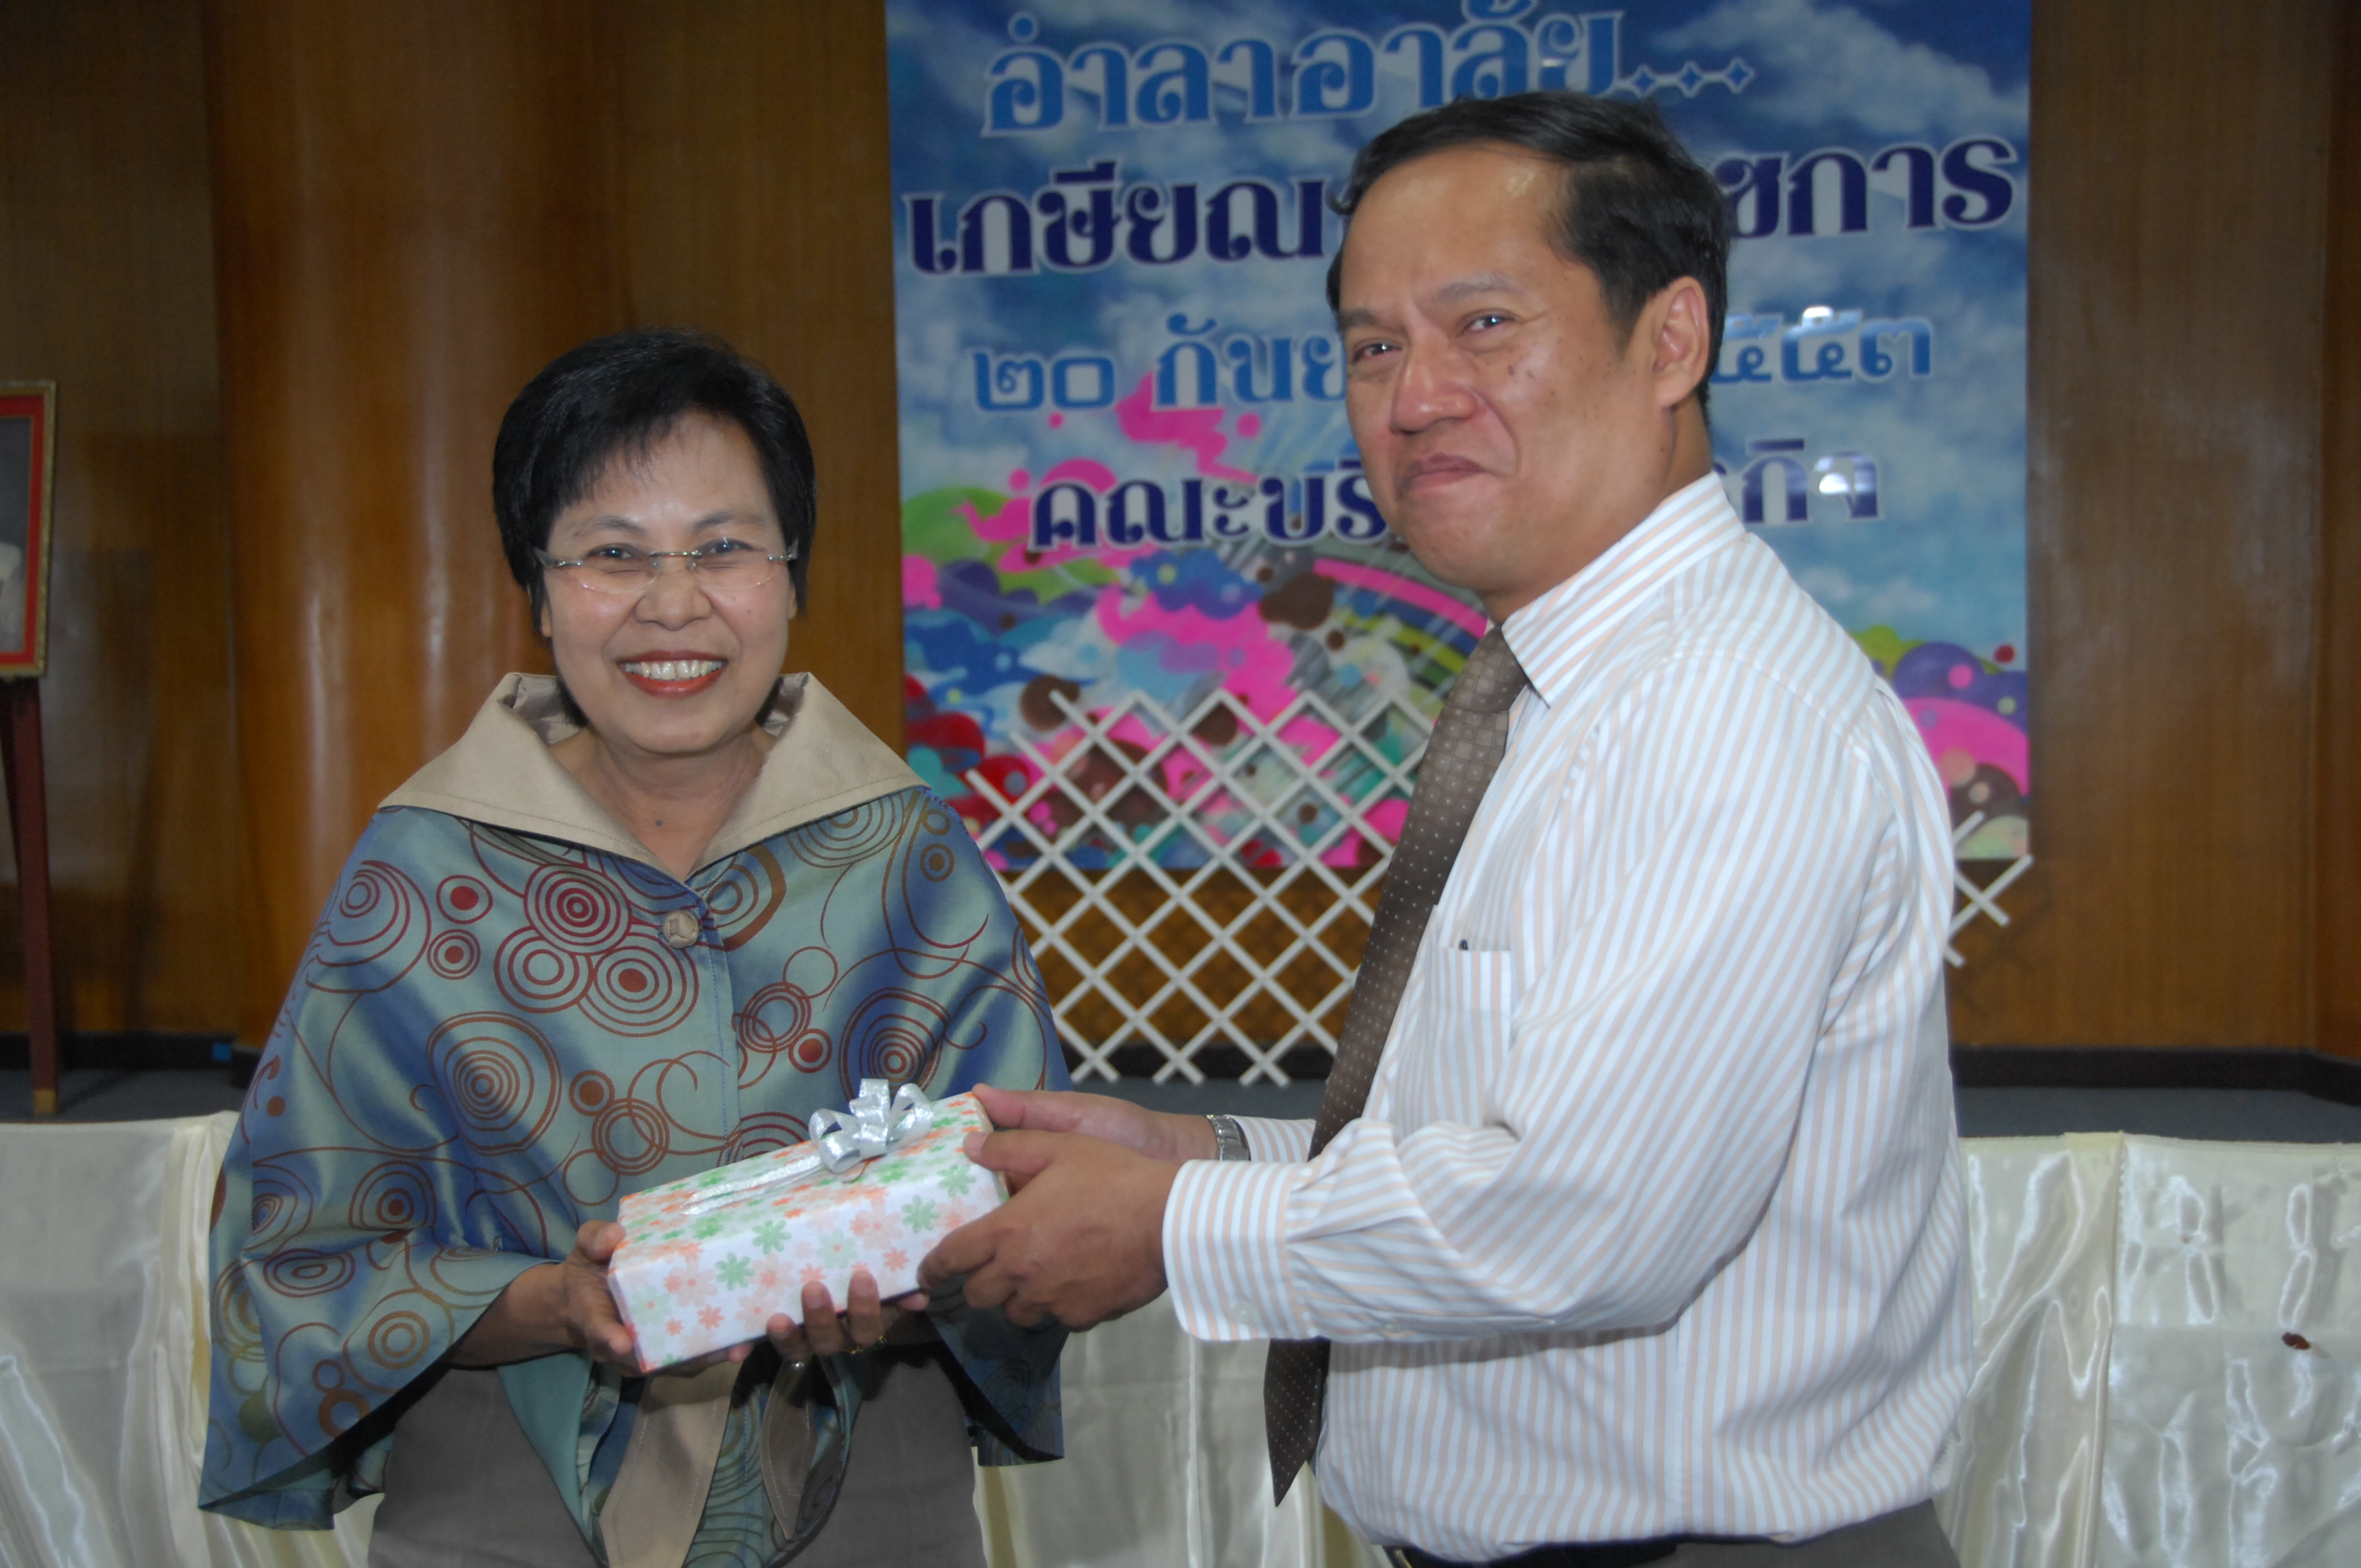 RMUTT gives gifts on the occasion of superannuation